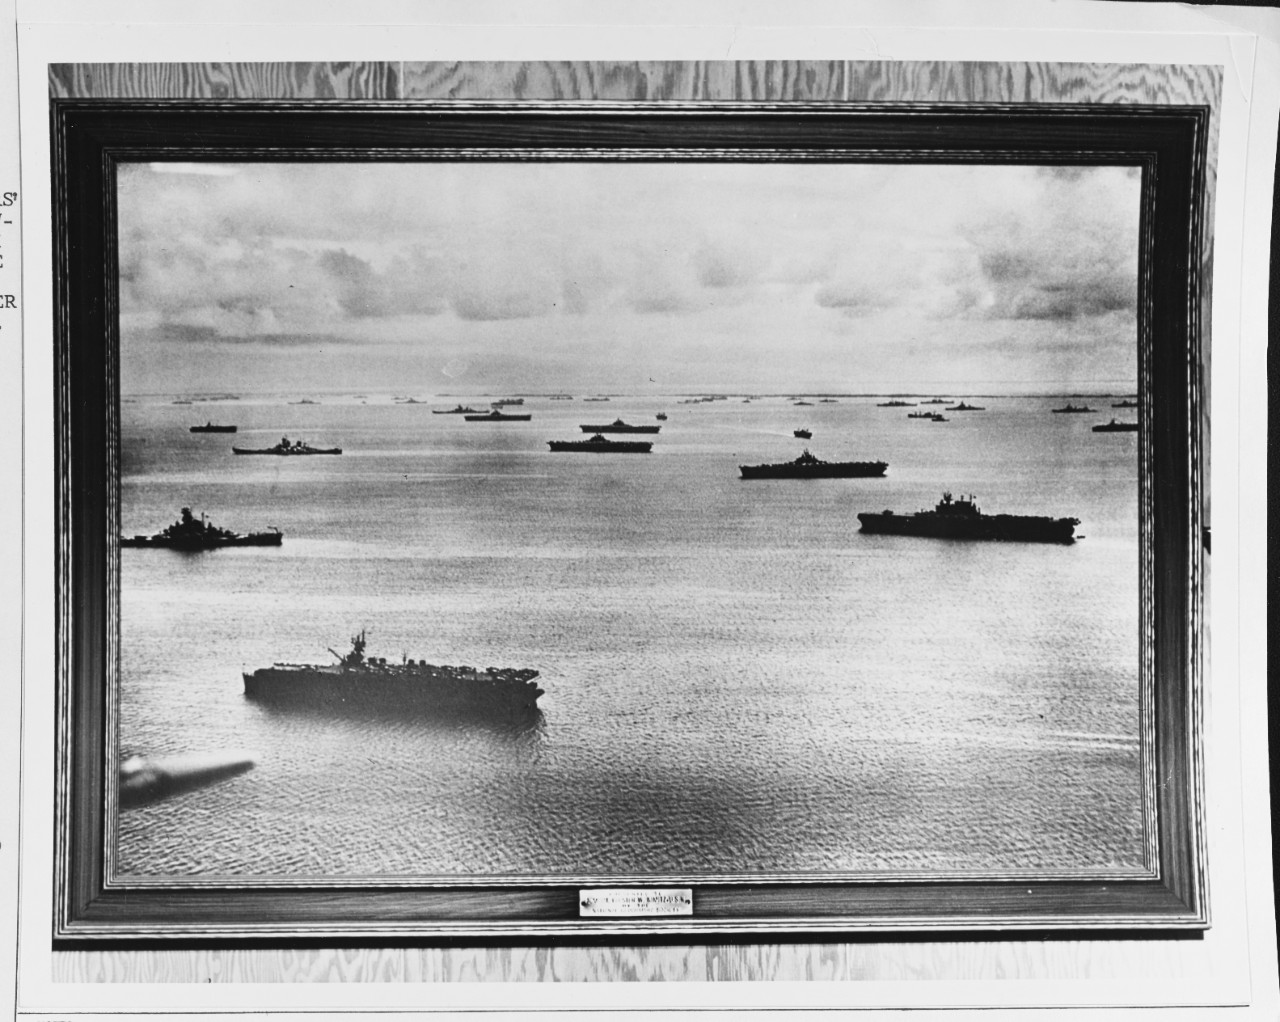 The cover of a clever wall chart case "Murderers' Row" at Ulithi Anchorage.